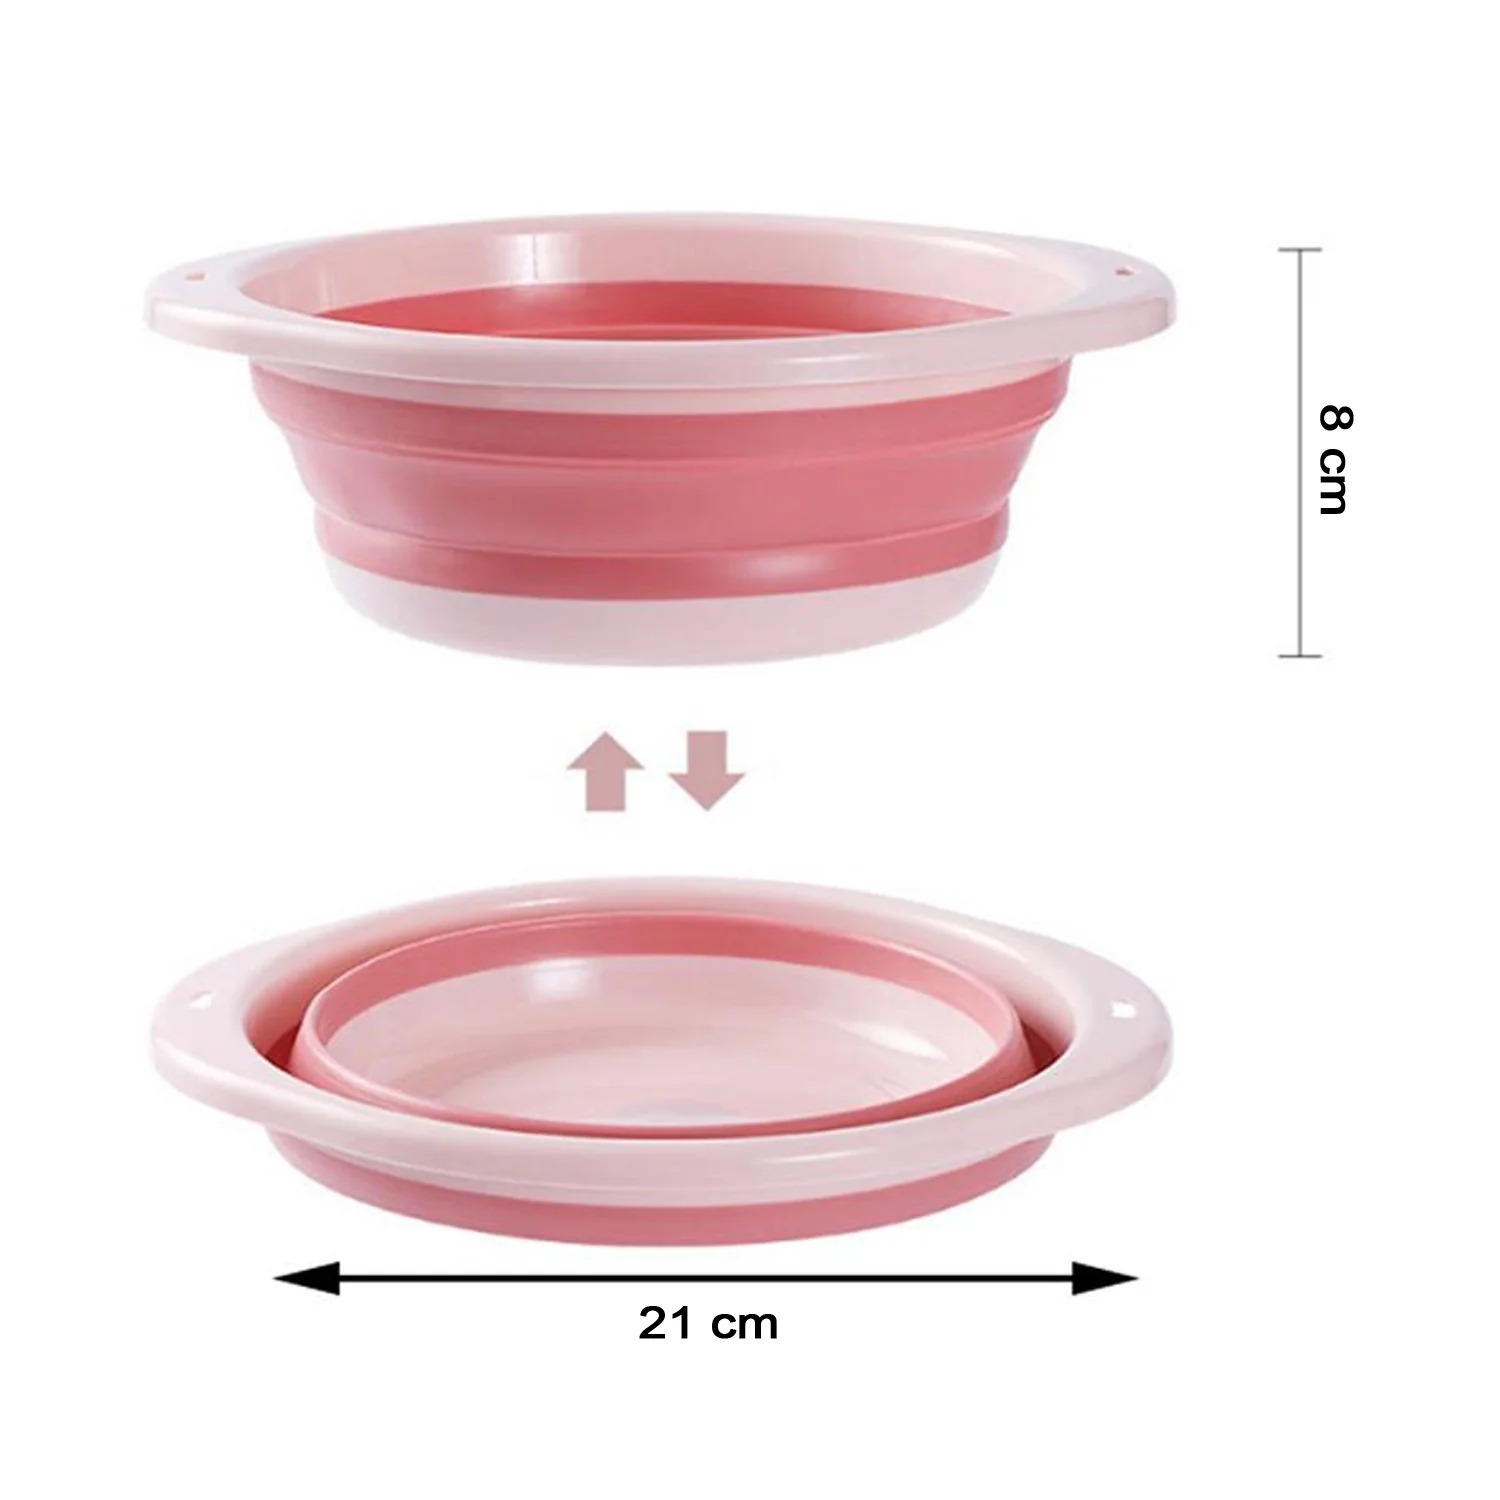 COLLAPSIBLE TUB FOLDING